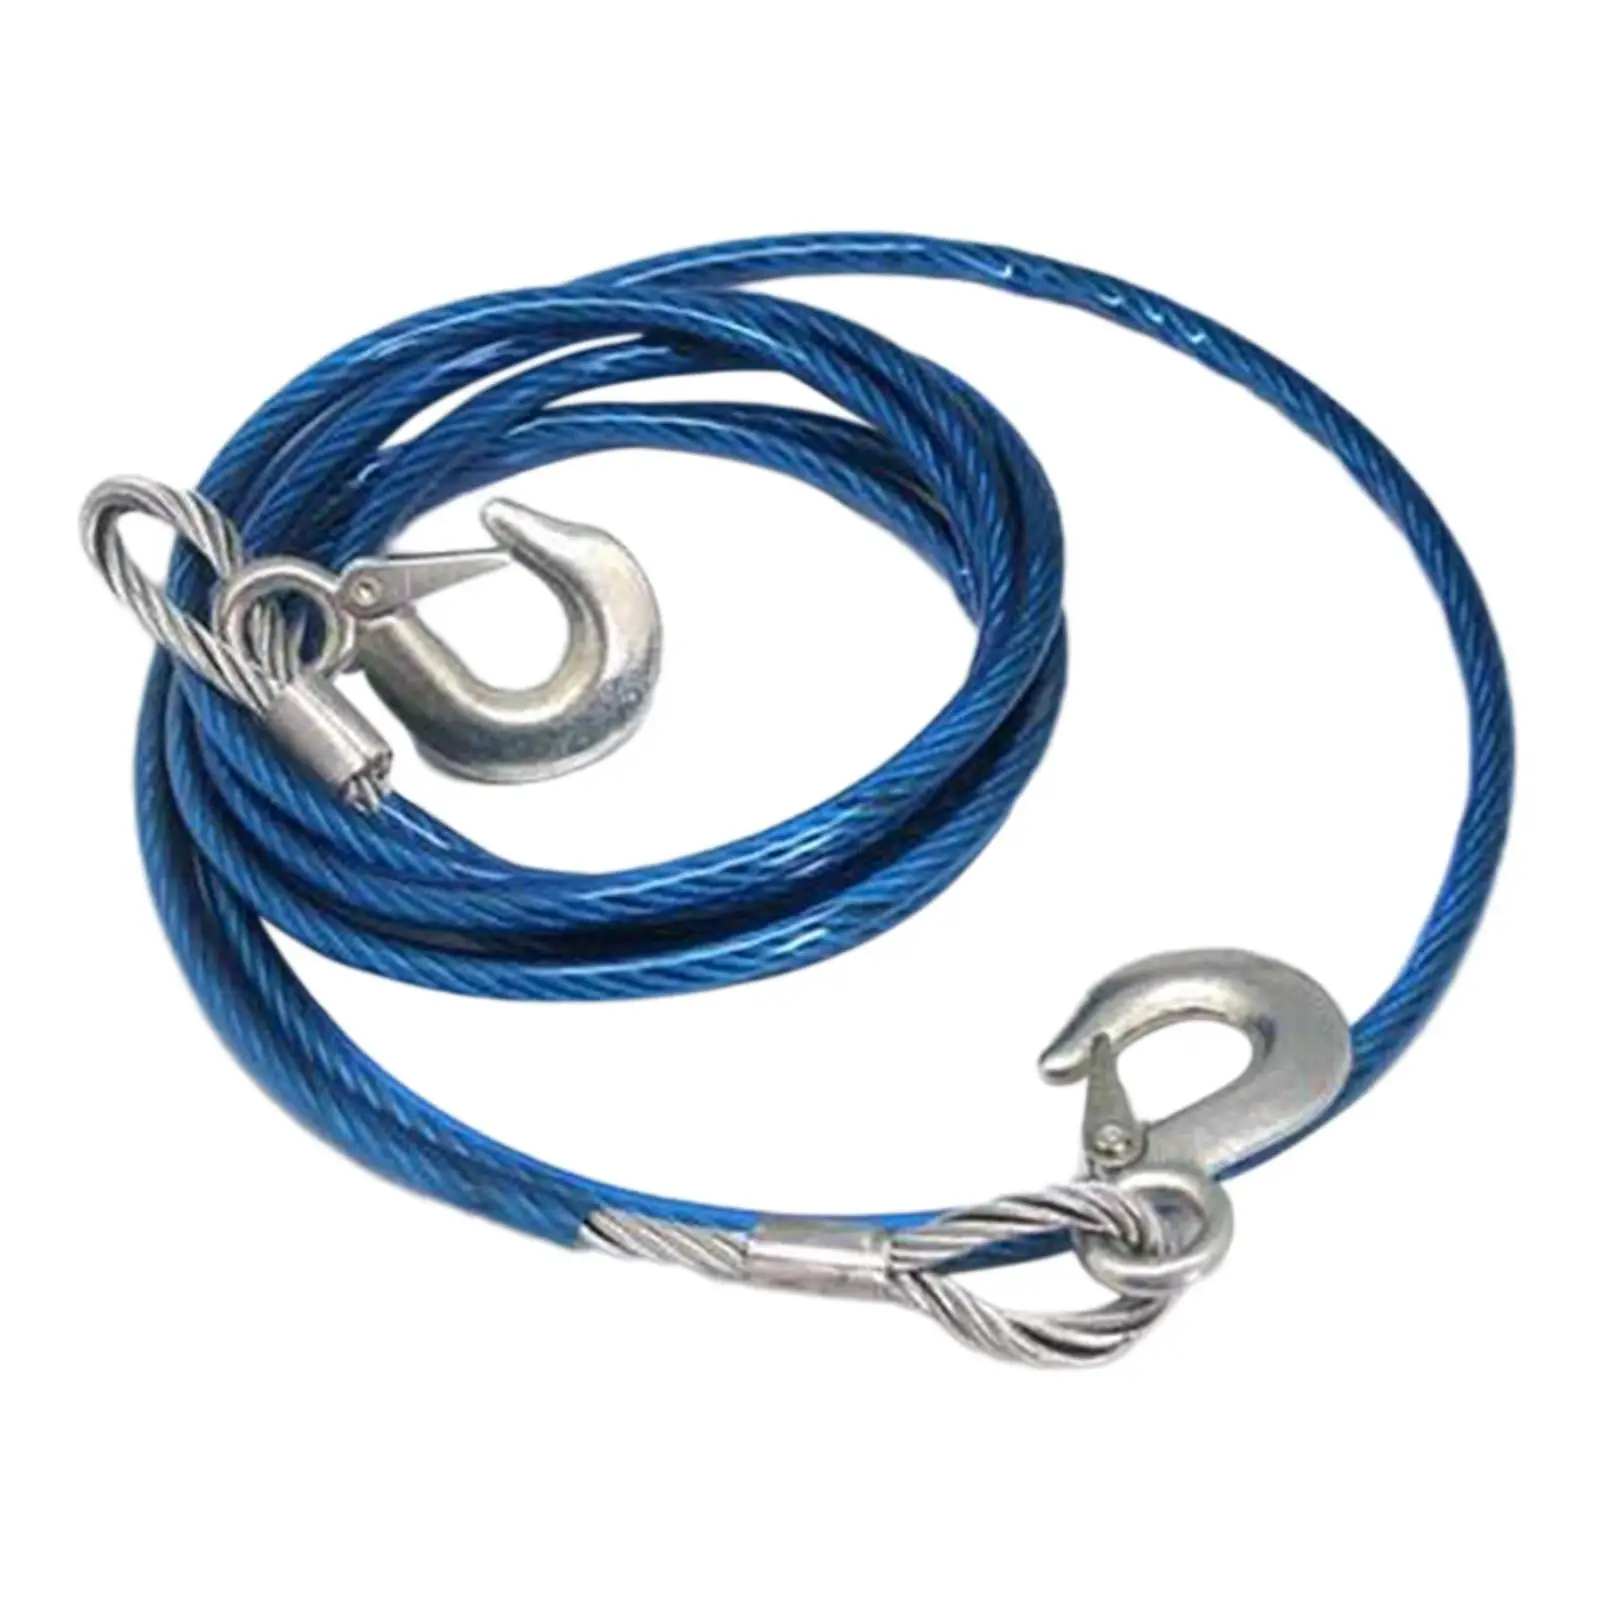 Vehicles Tow Rope Trailer Belt for Vehicle Recovery Towing Hauling